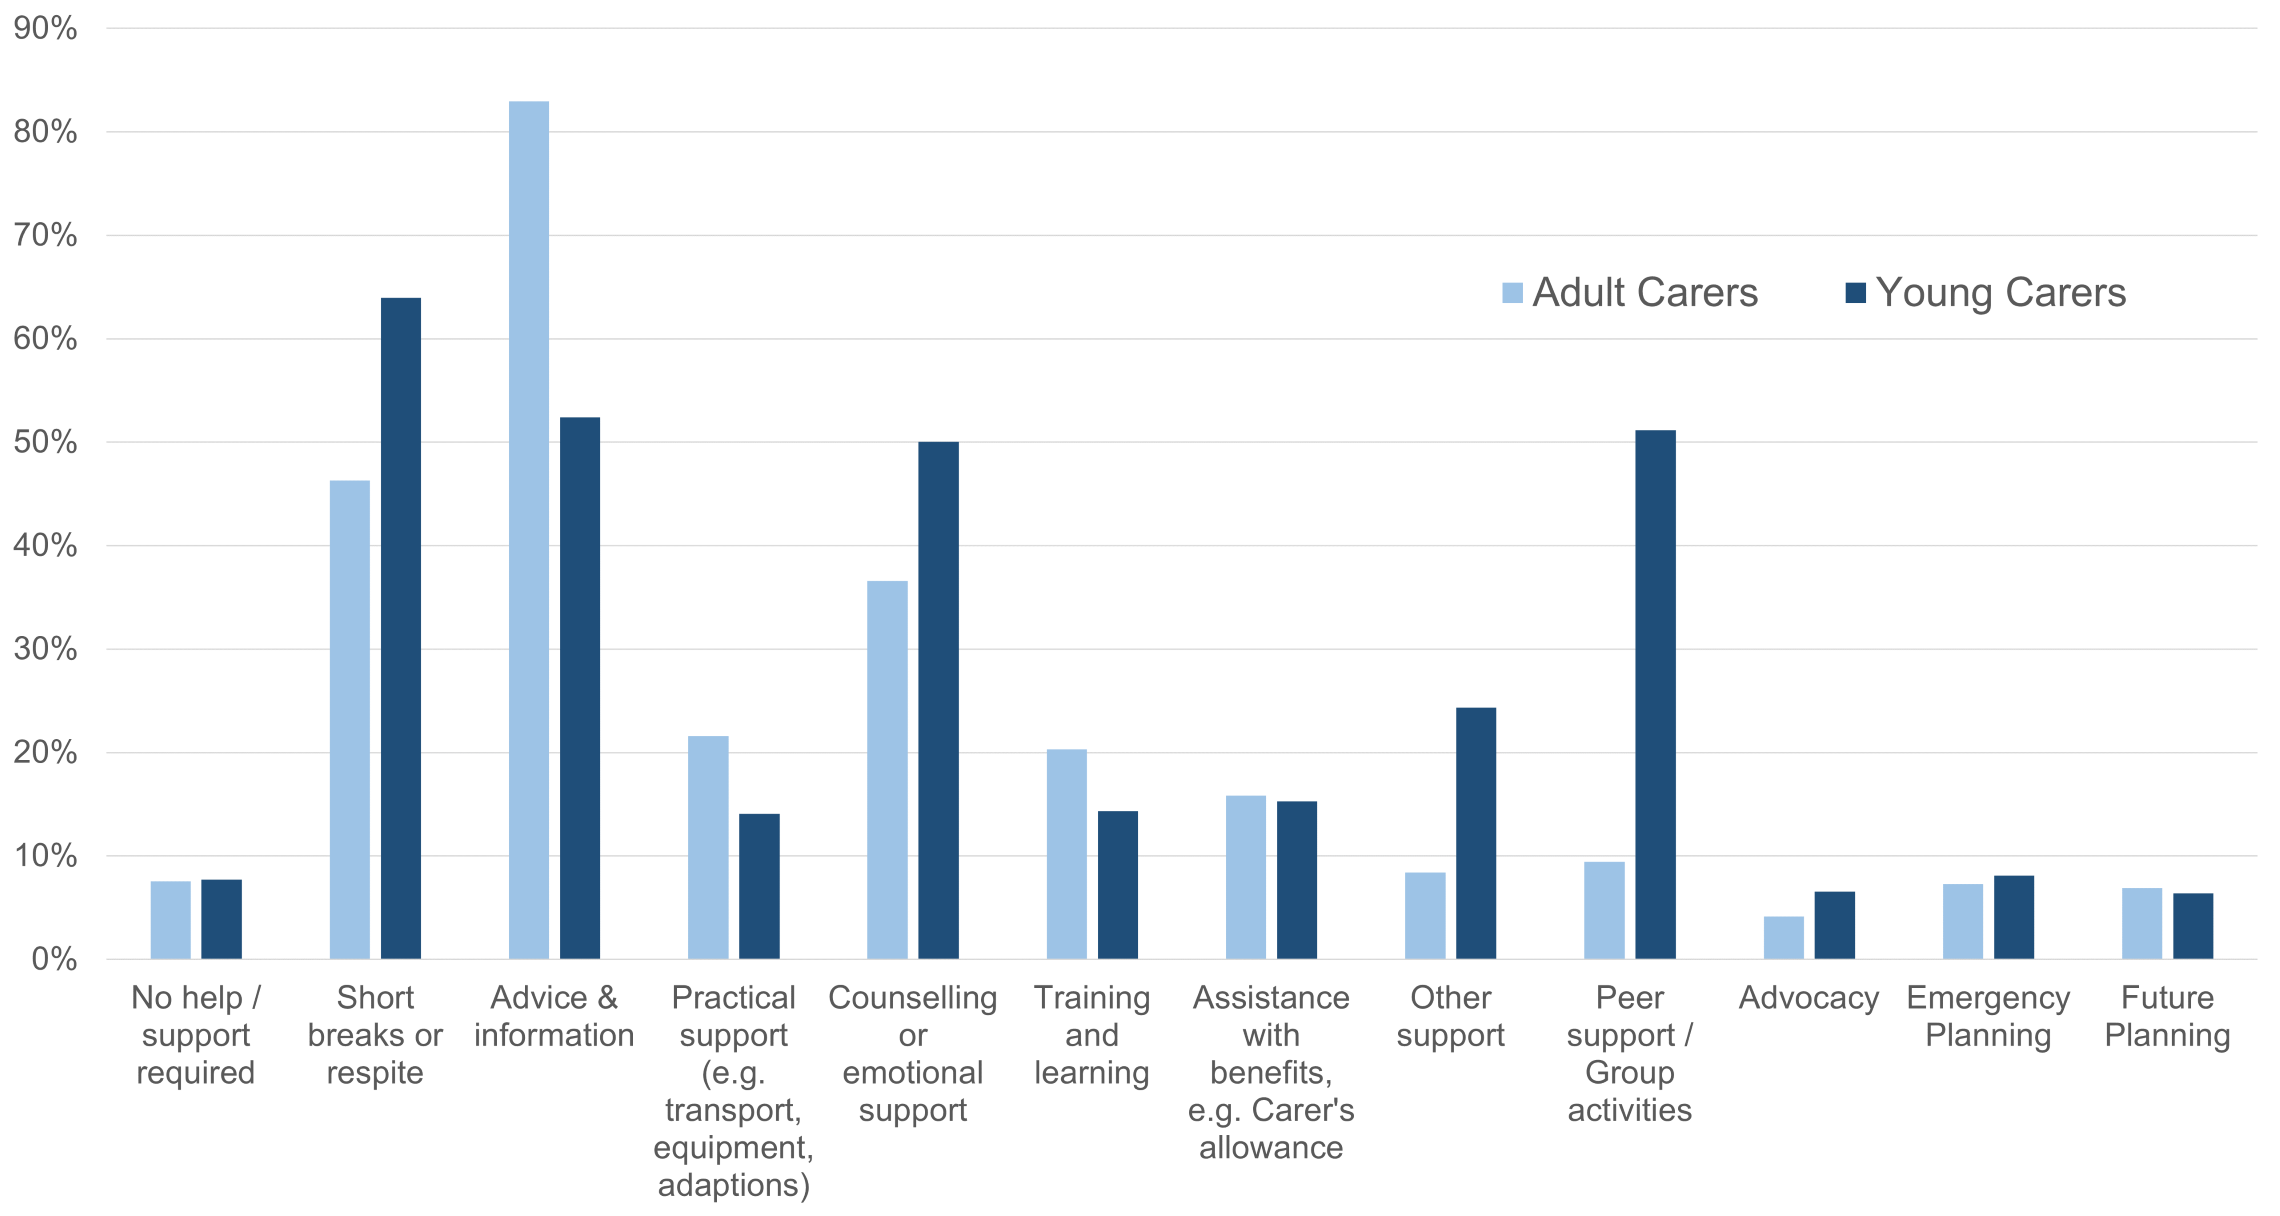 Bar chart showing support needs of young and adult carers. The most common support need recorded was advice and information, followed by short breaks and respite.